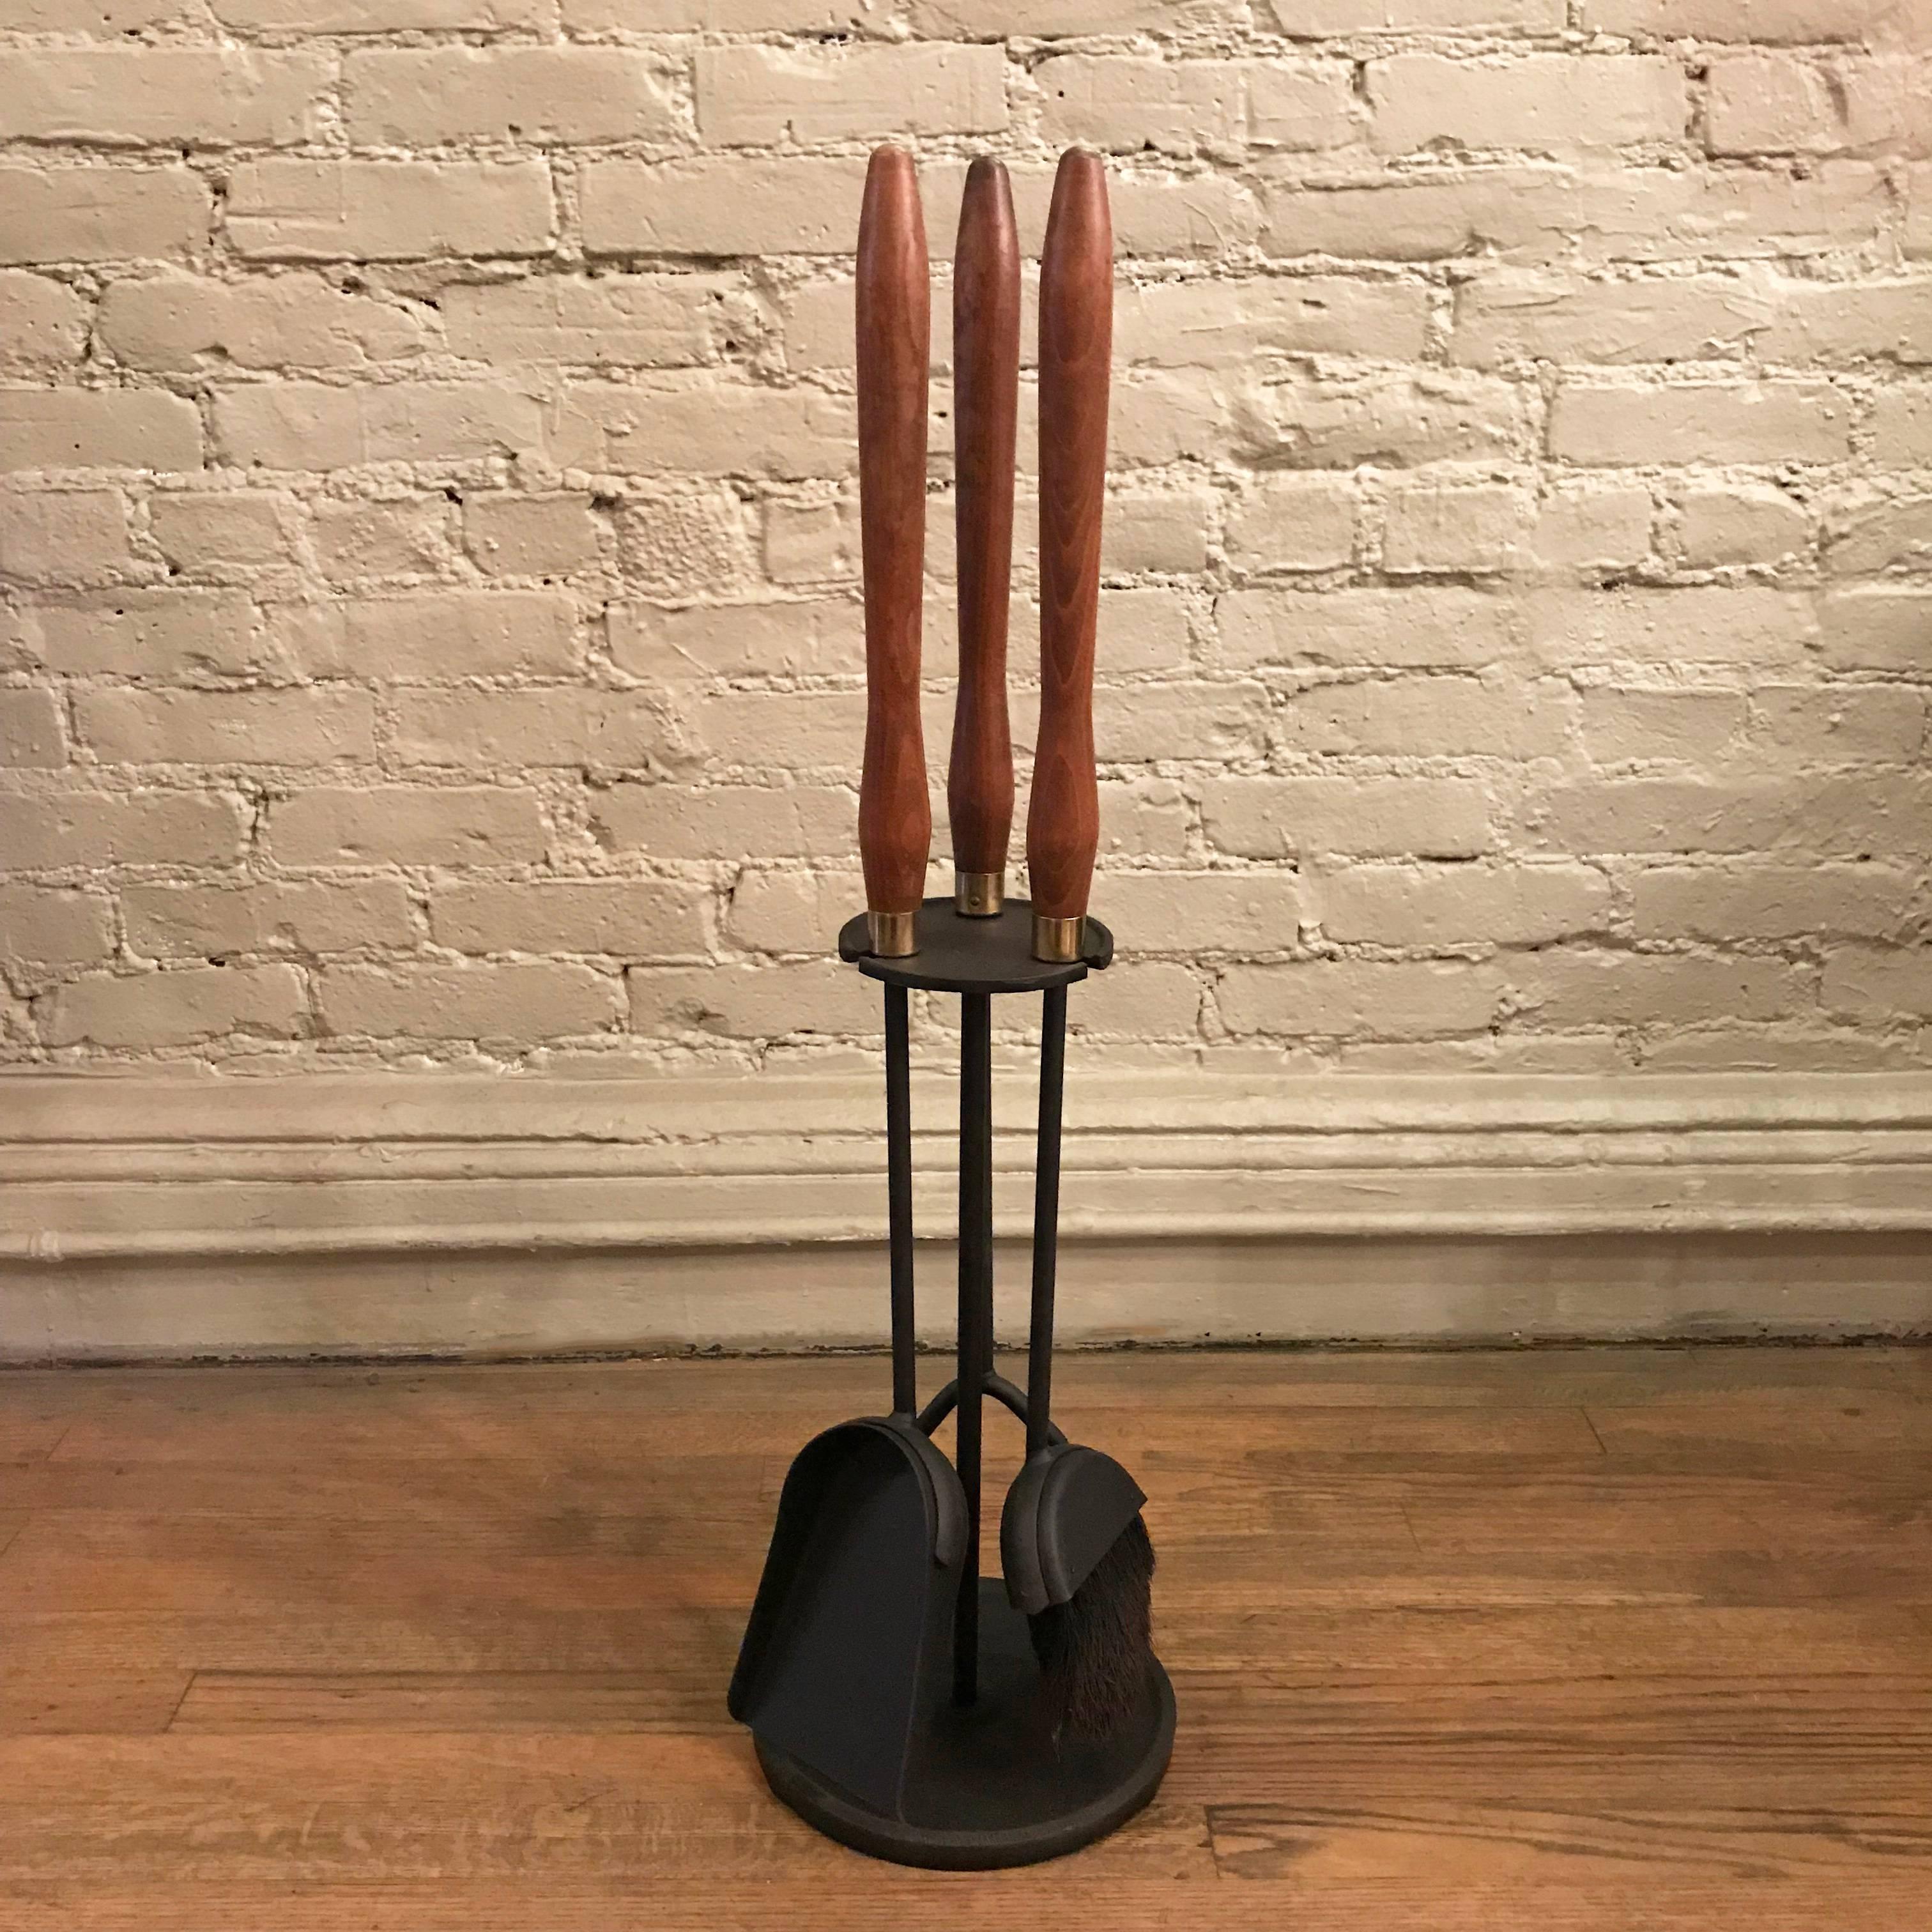 Mid-Century Modern, three-piece, fireplace toolset features a wrought iron stand and tools; stoker, broom and shovel with maple and brass handles.